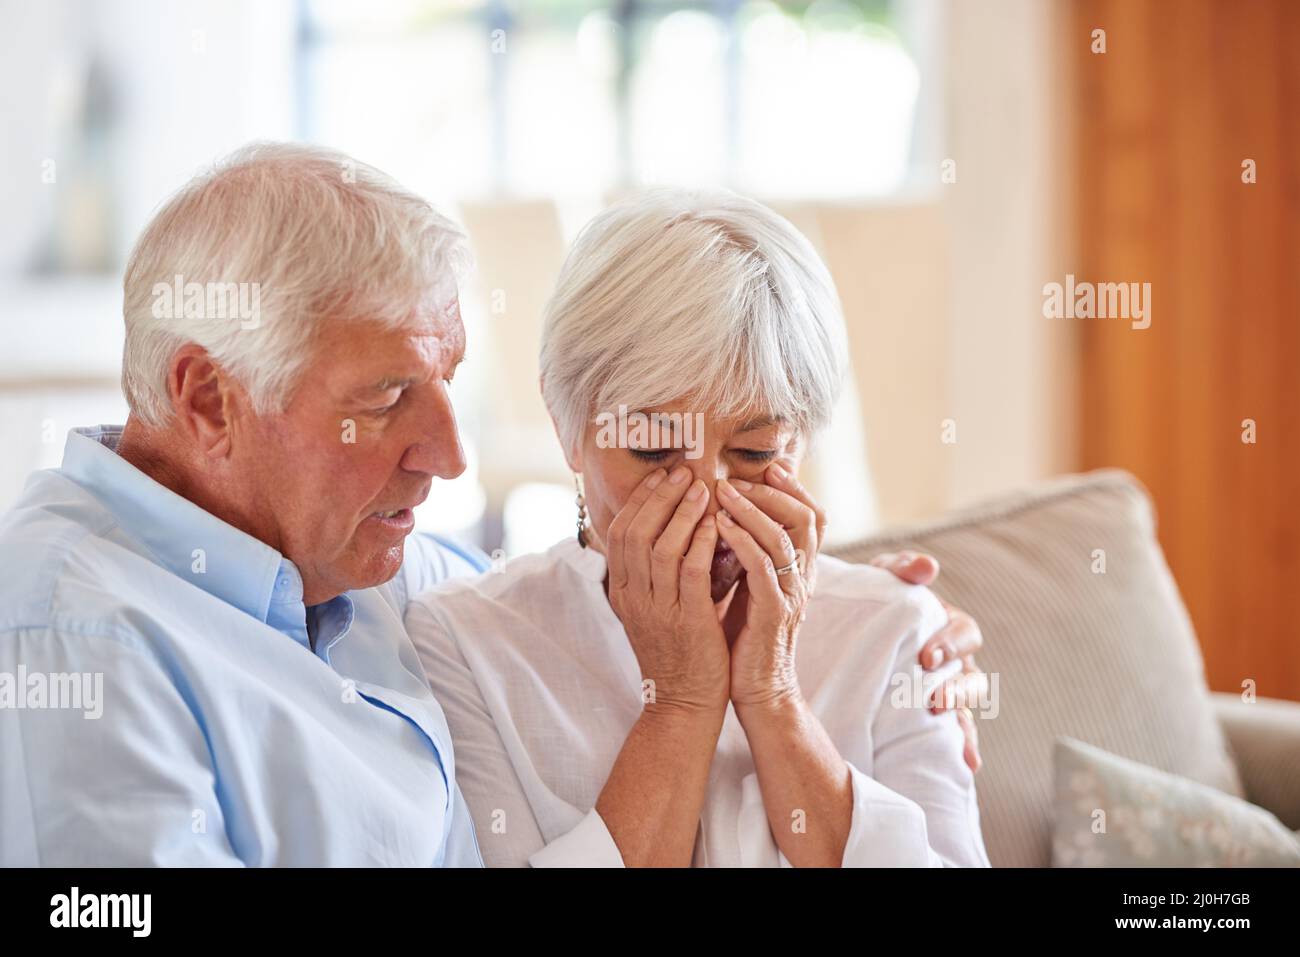 The first duty of love is to listen. Shot of a senior man consoling his wife. Stock Photo